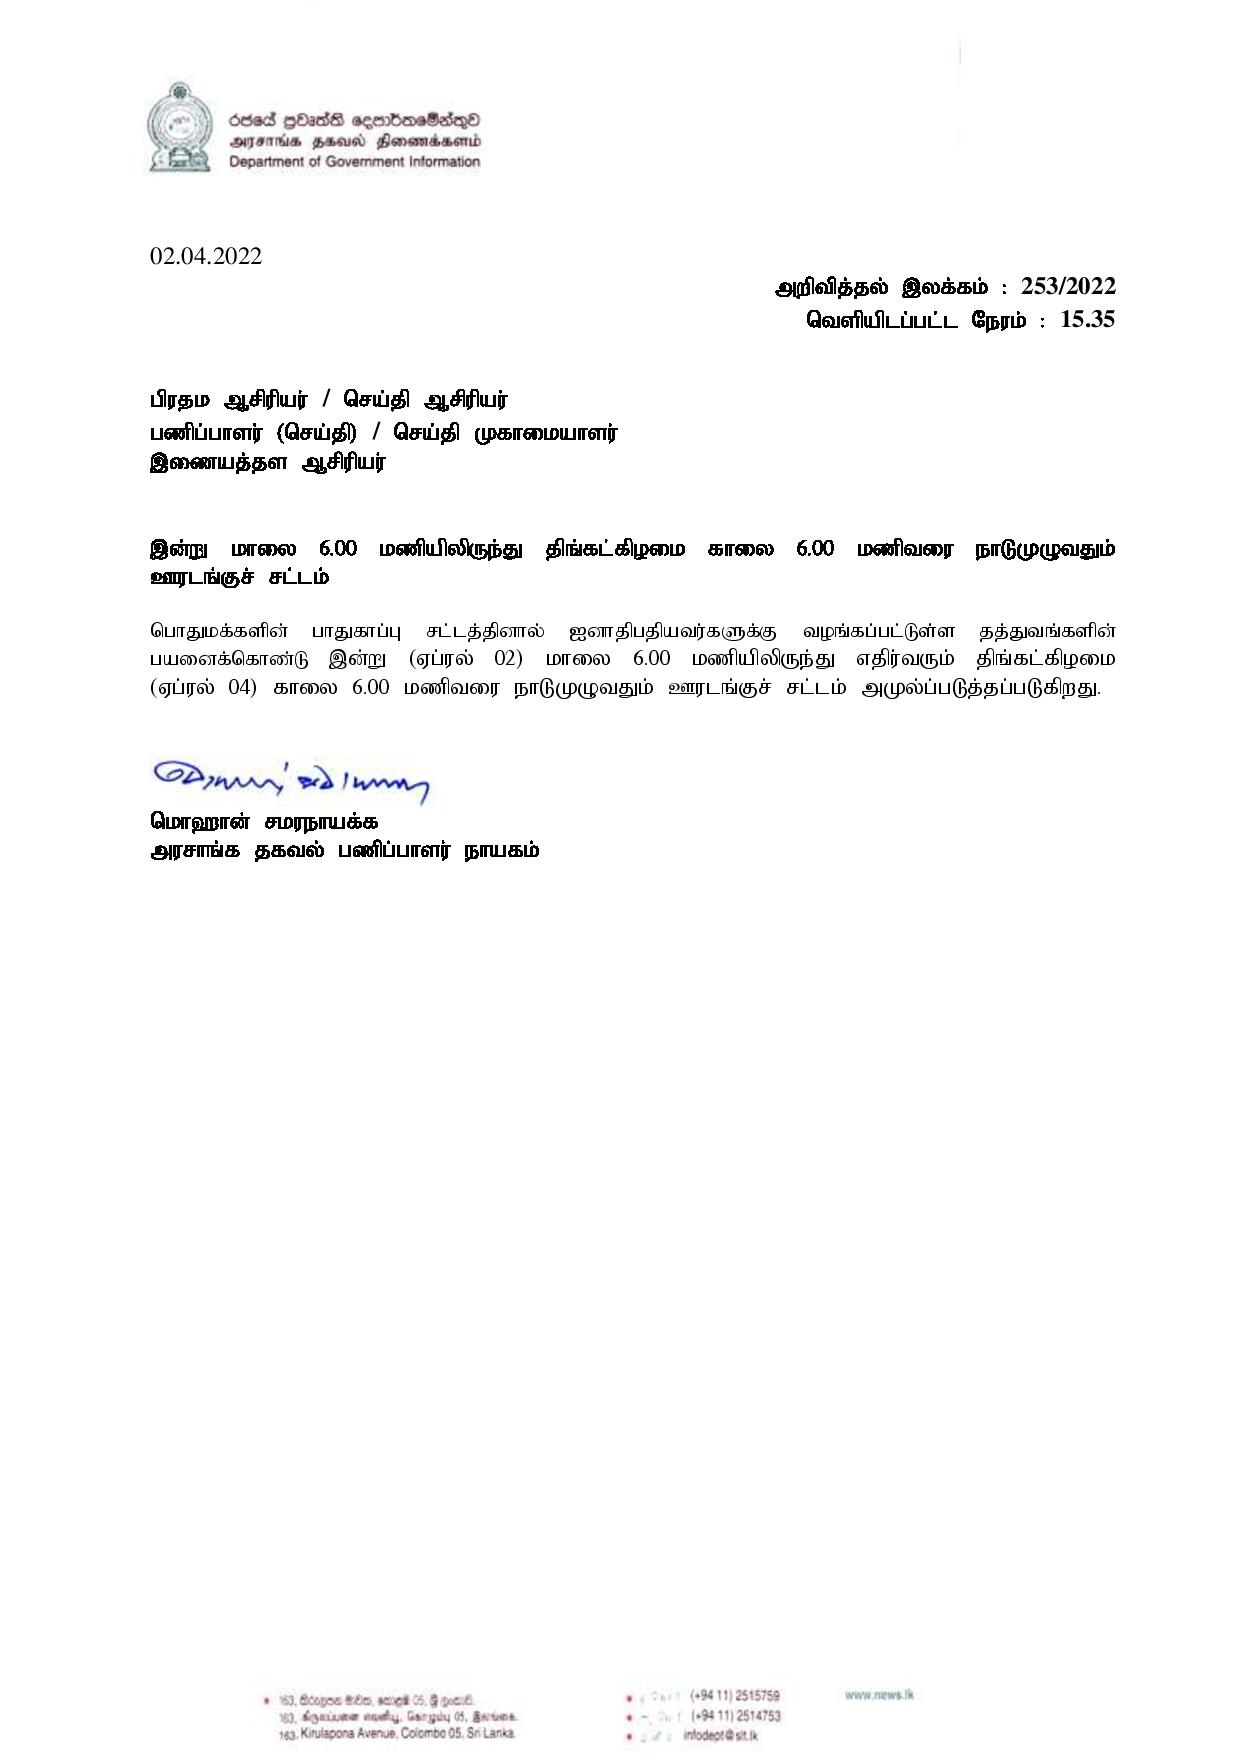 Release No 253 Tamil page 001